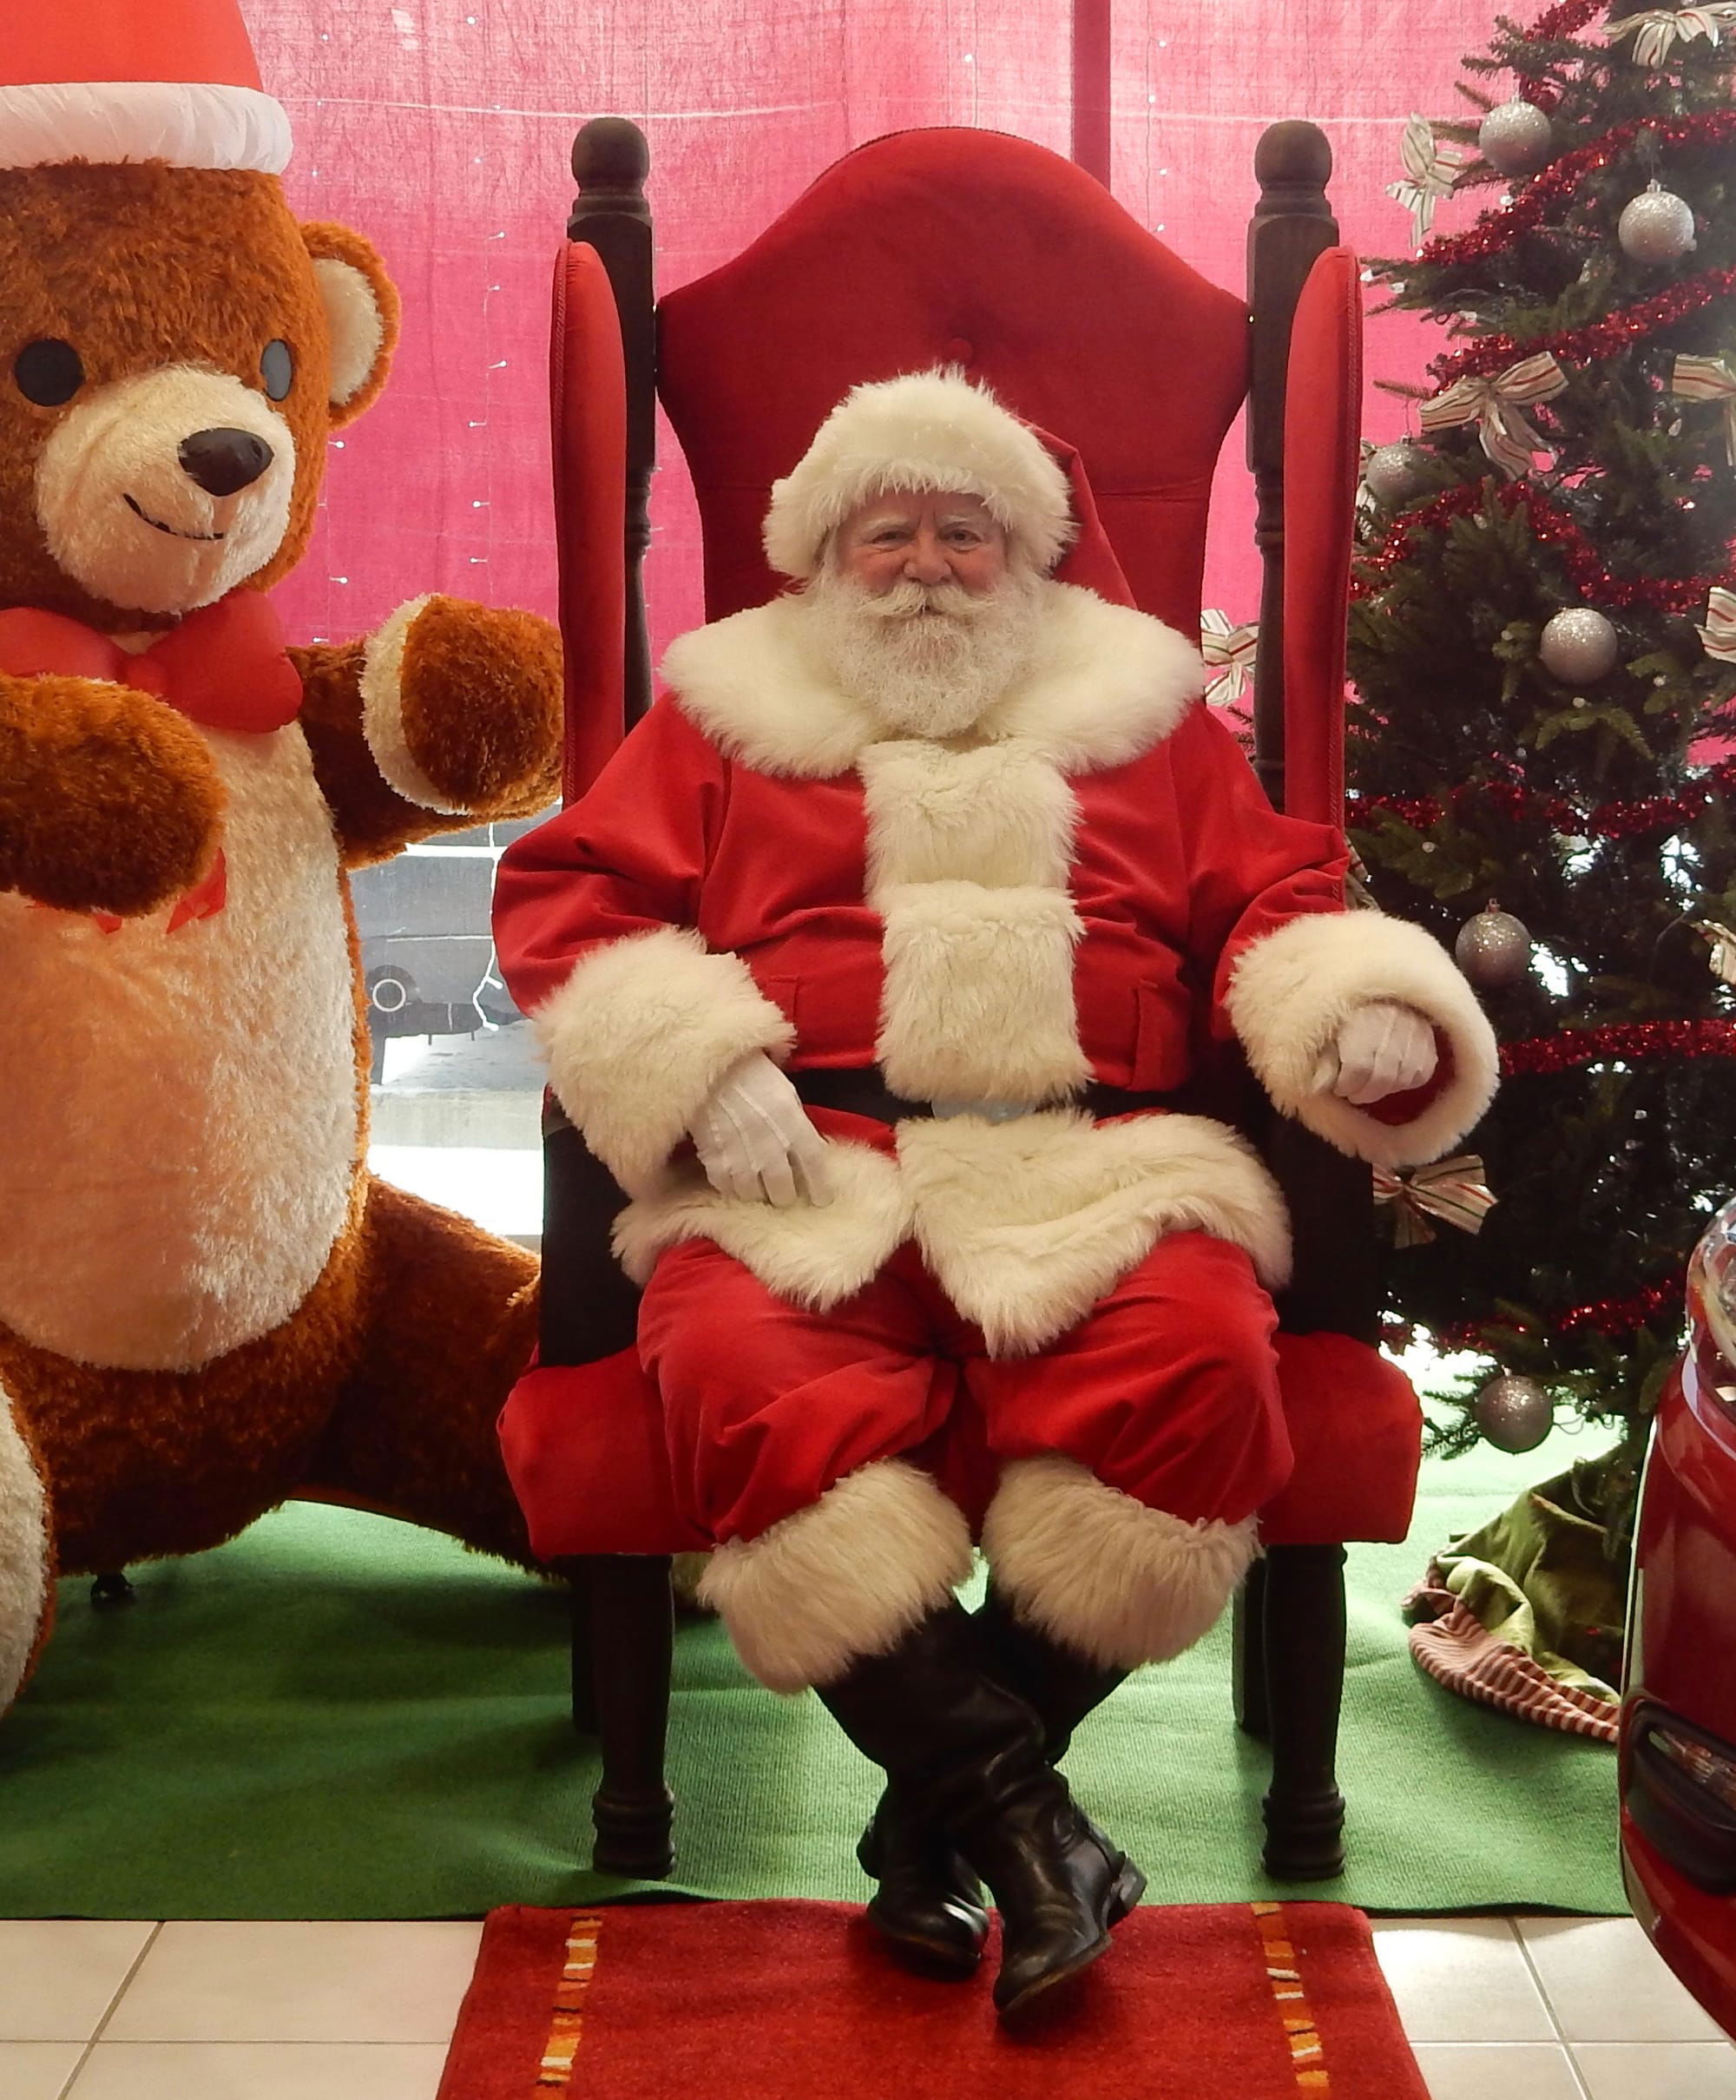 Book now and let Edmonton's Santa bring the joy of Christmas to your doorstep!